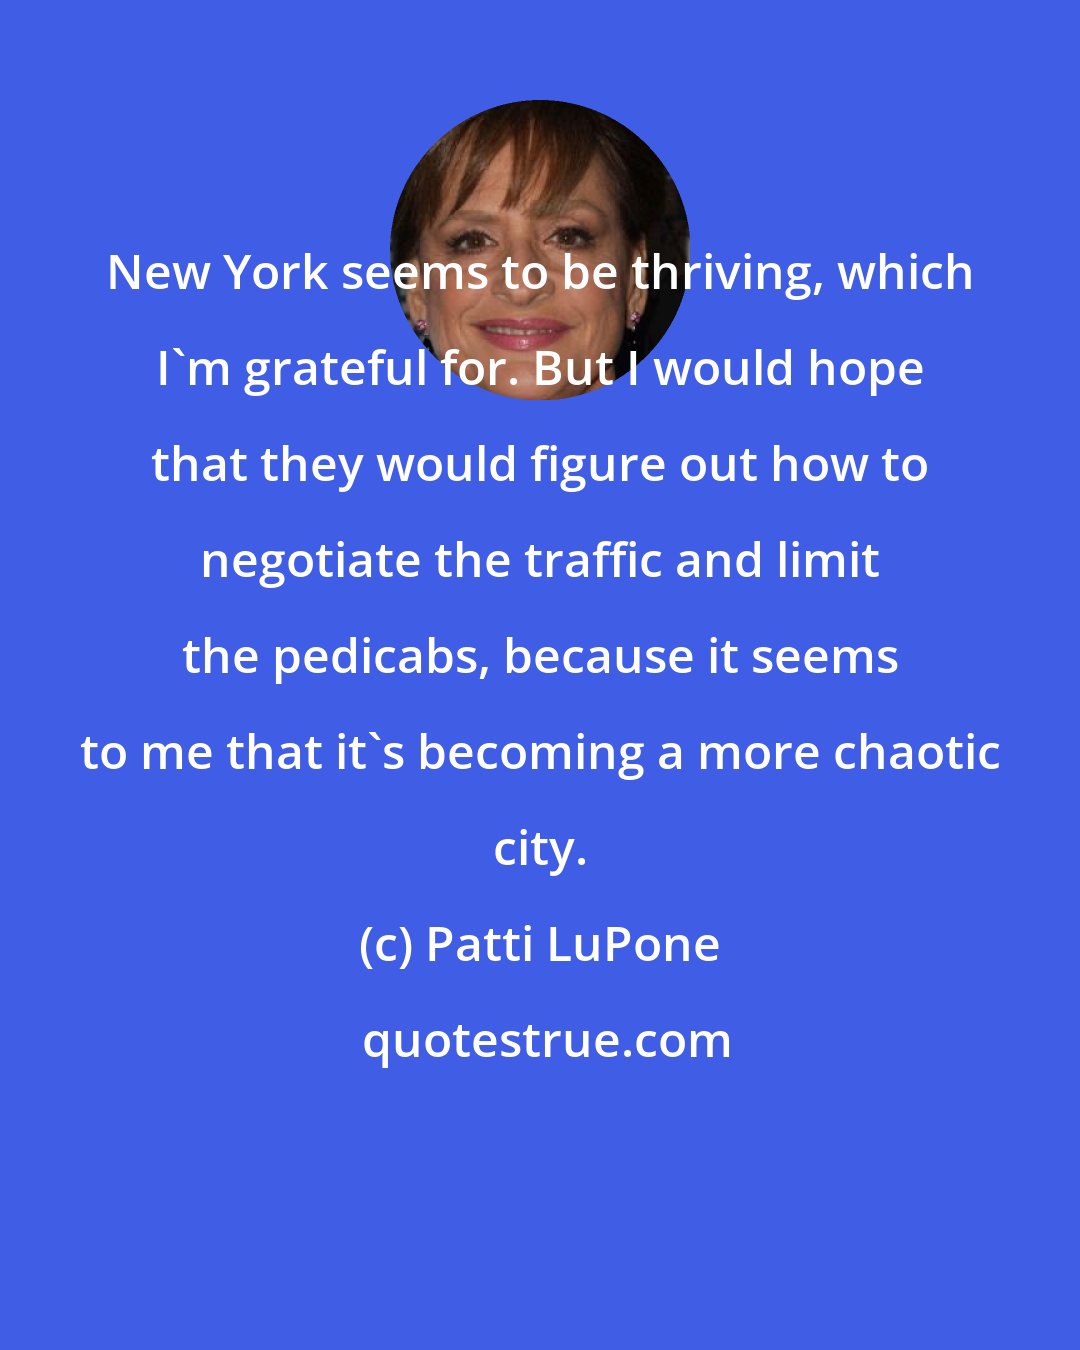 Patti LuPone: New York seems to be thriving, which I'm grateful for. But I would hope that they would figure out how to negotiate the traffic and limit the pedicabs, because it seems to me that it's becoming a more chaotic city.